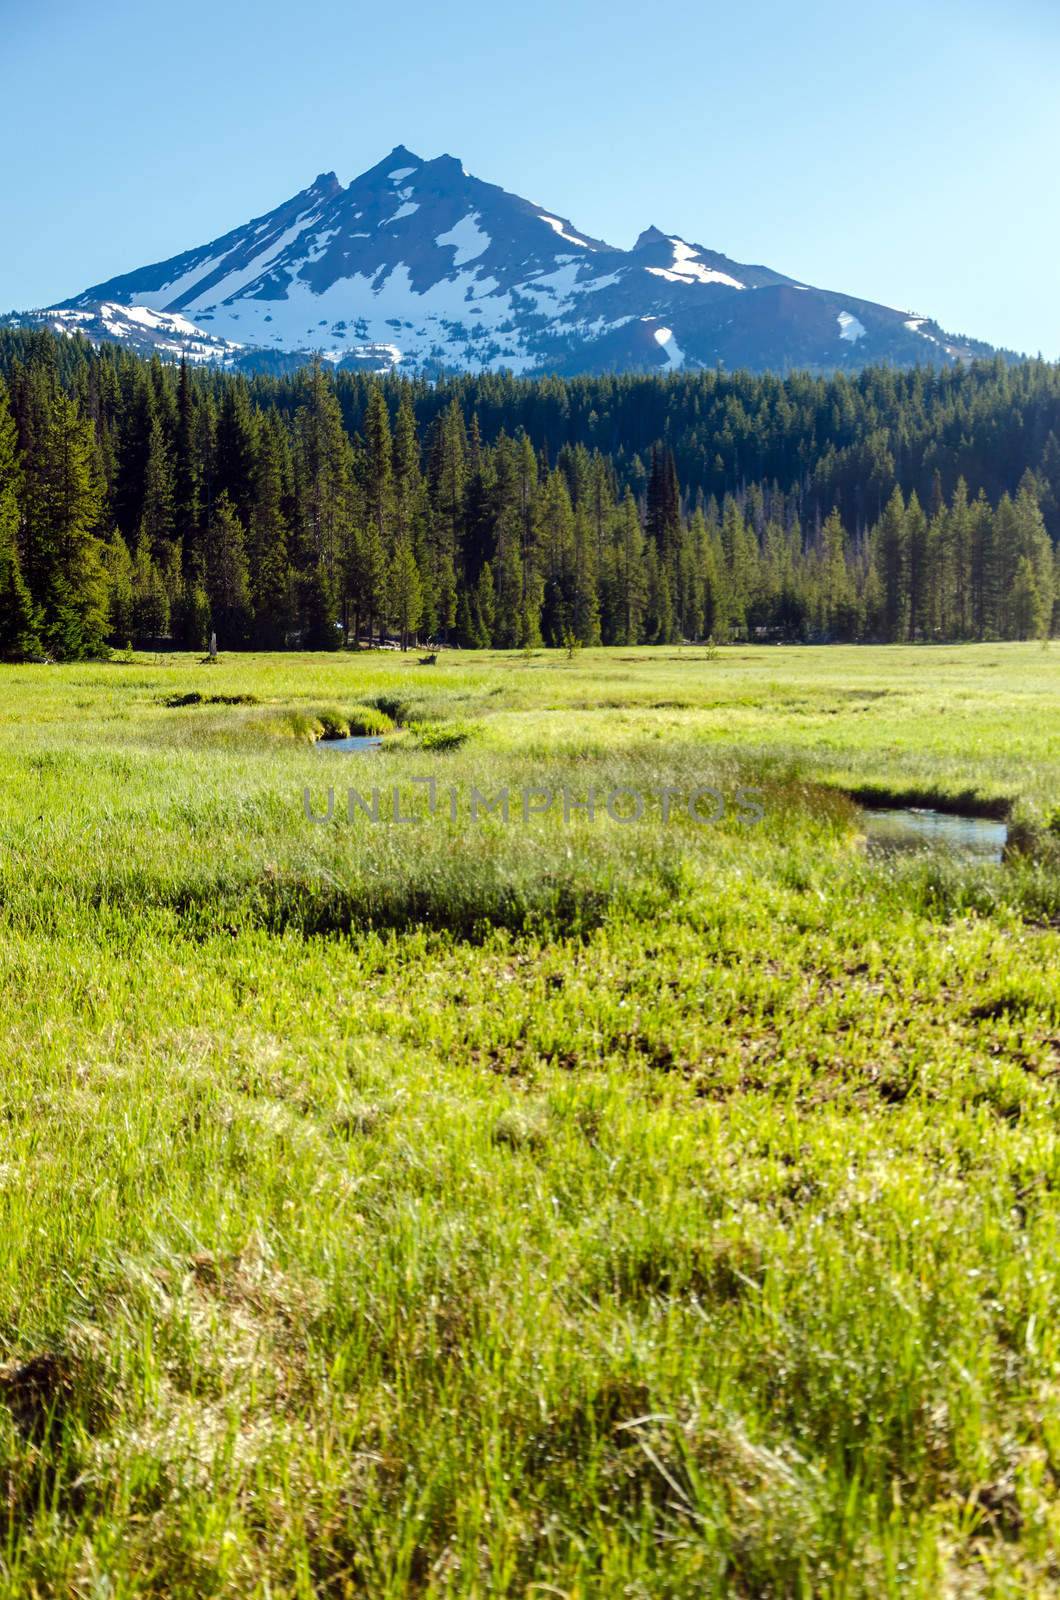 South Sister viewed from a lush green meadow in Central Oregon